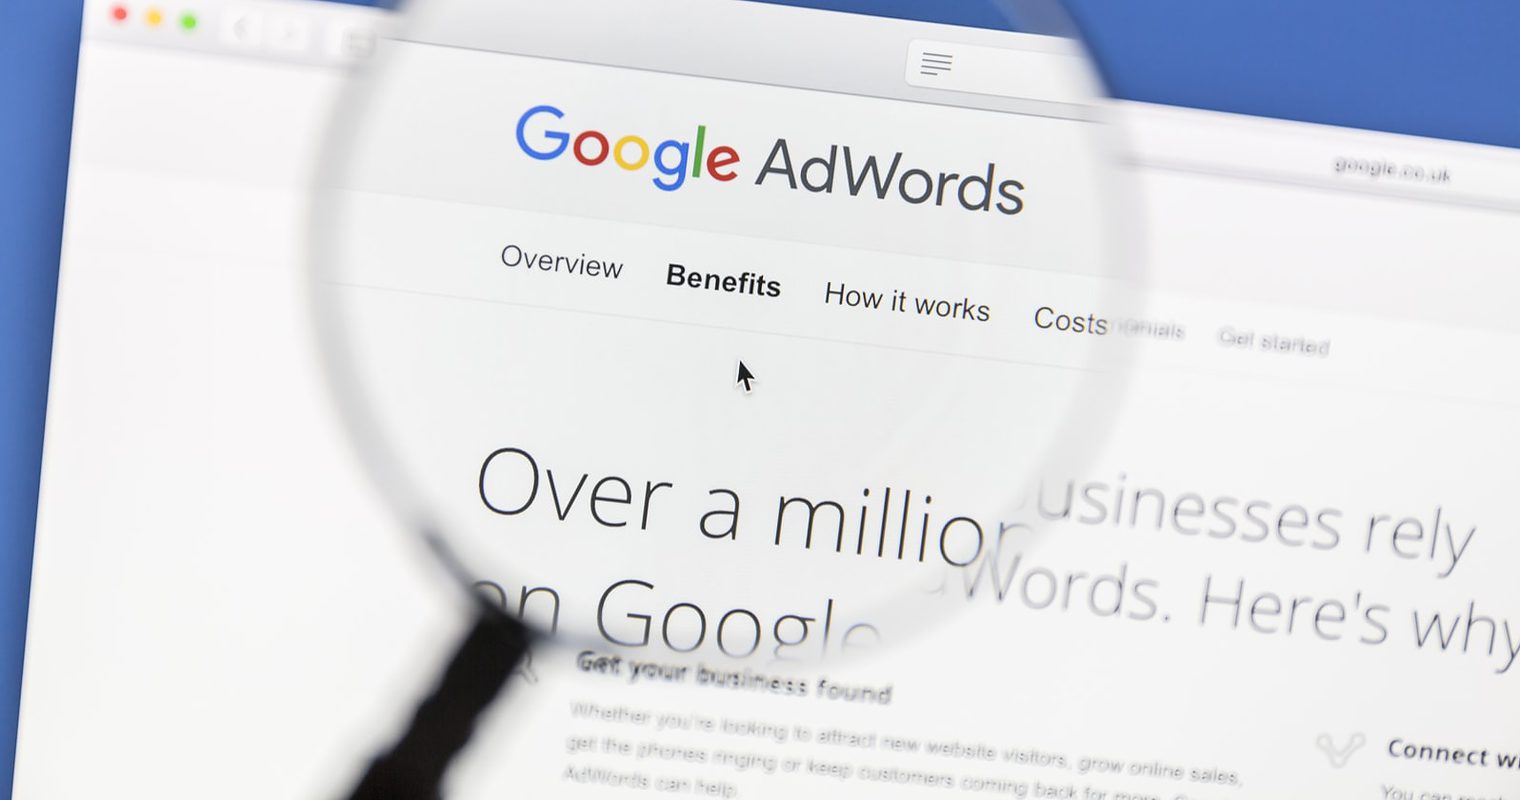 New AdWords Experience Rolling Out by End of the Year